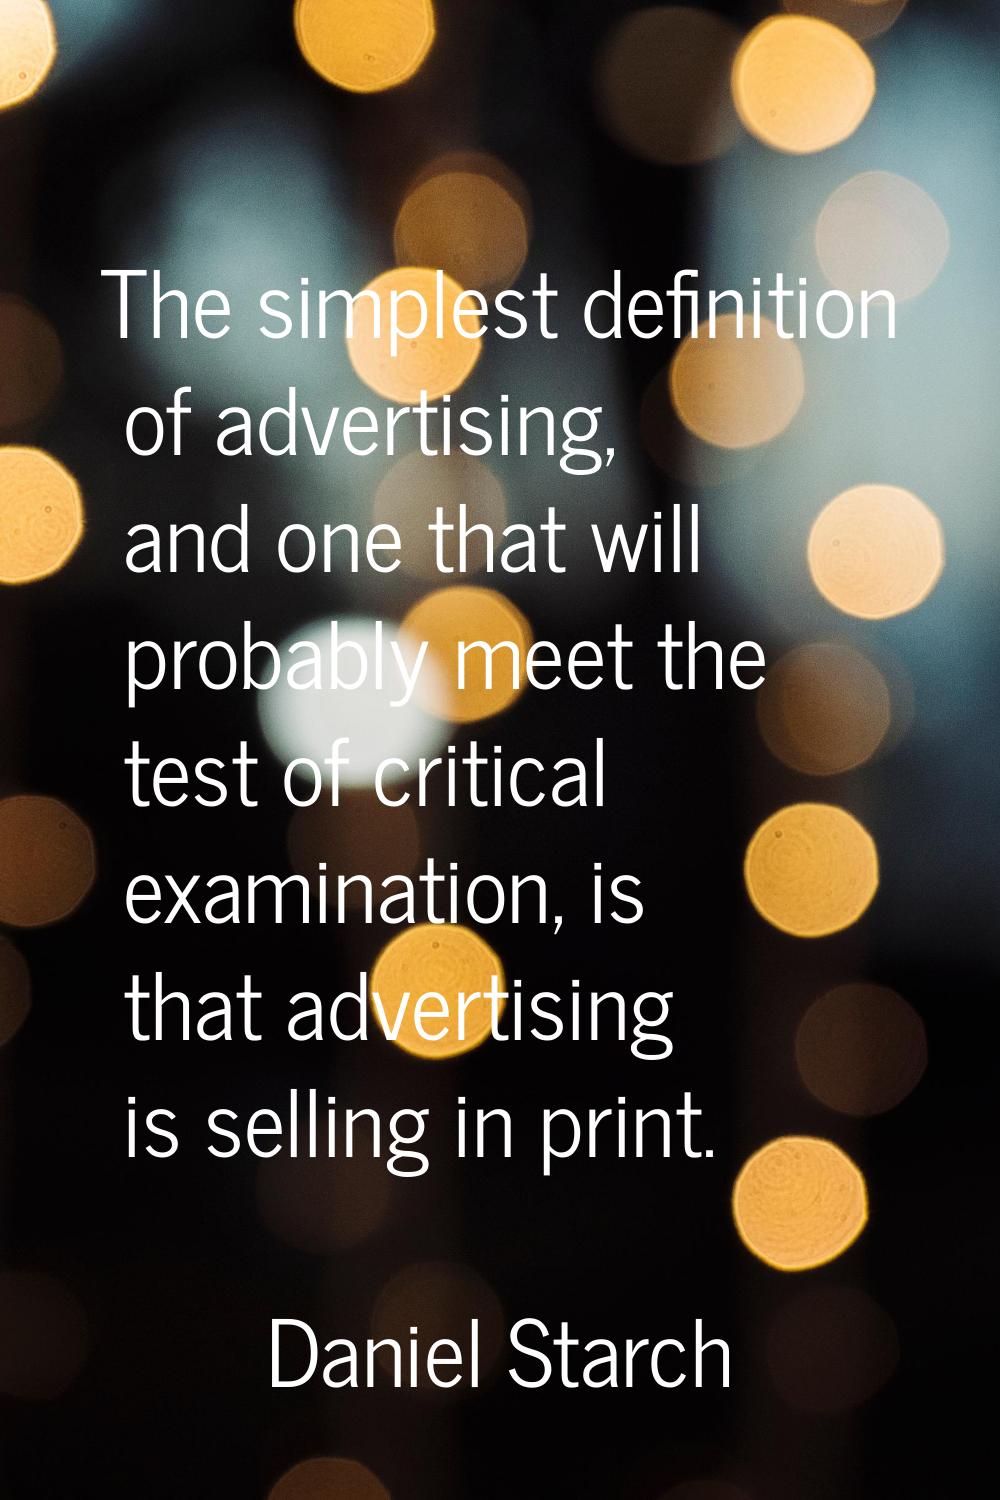 The simplest definition of advertising, and one that will probably meet the test of critical examin